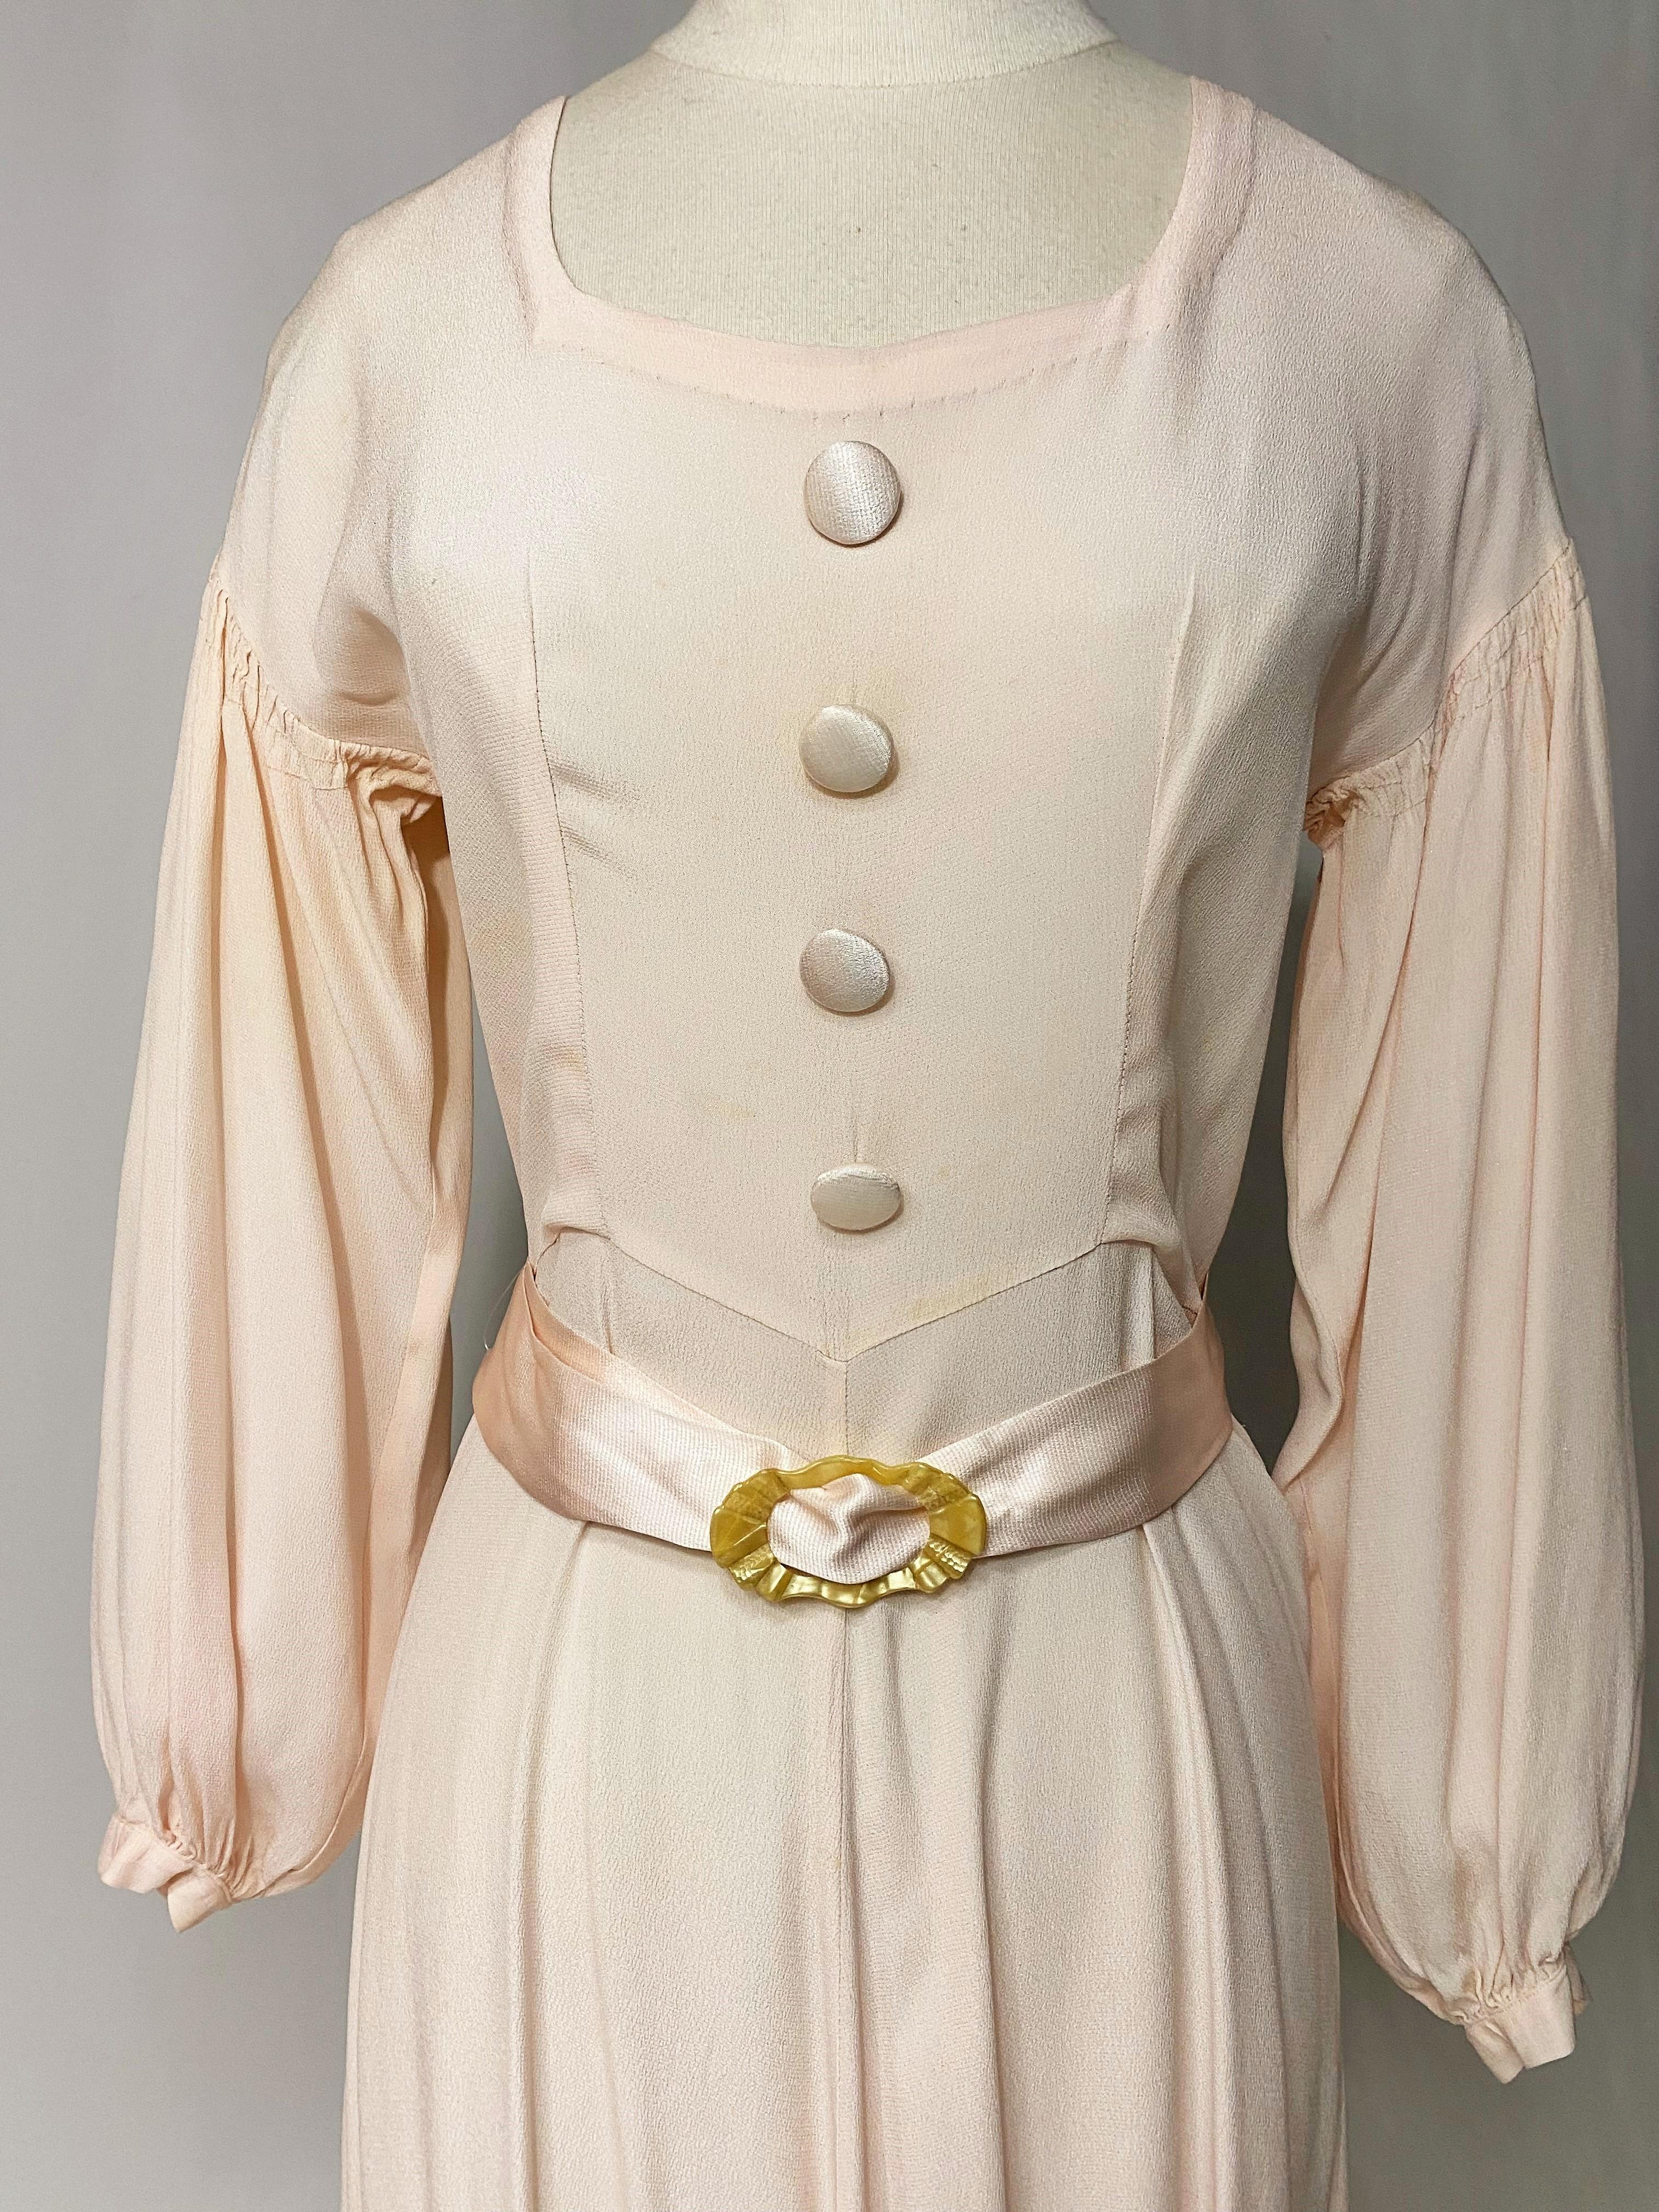 Beige A French Powder Pink Crepe Satin Ceremonial Dress Circa 1940 For Sale